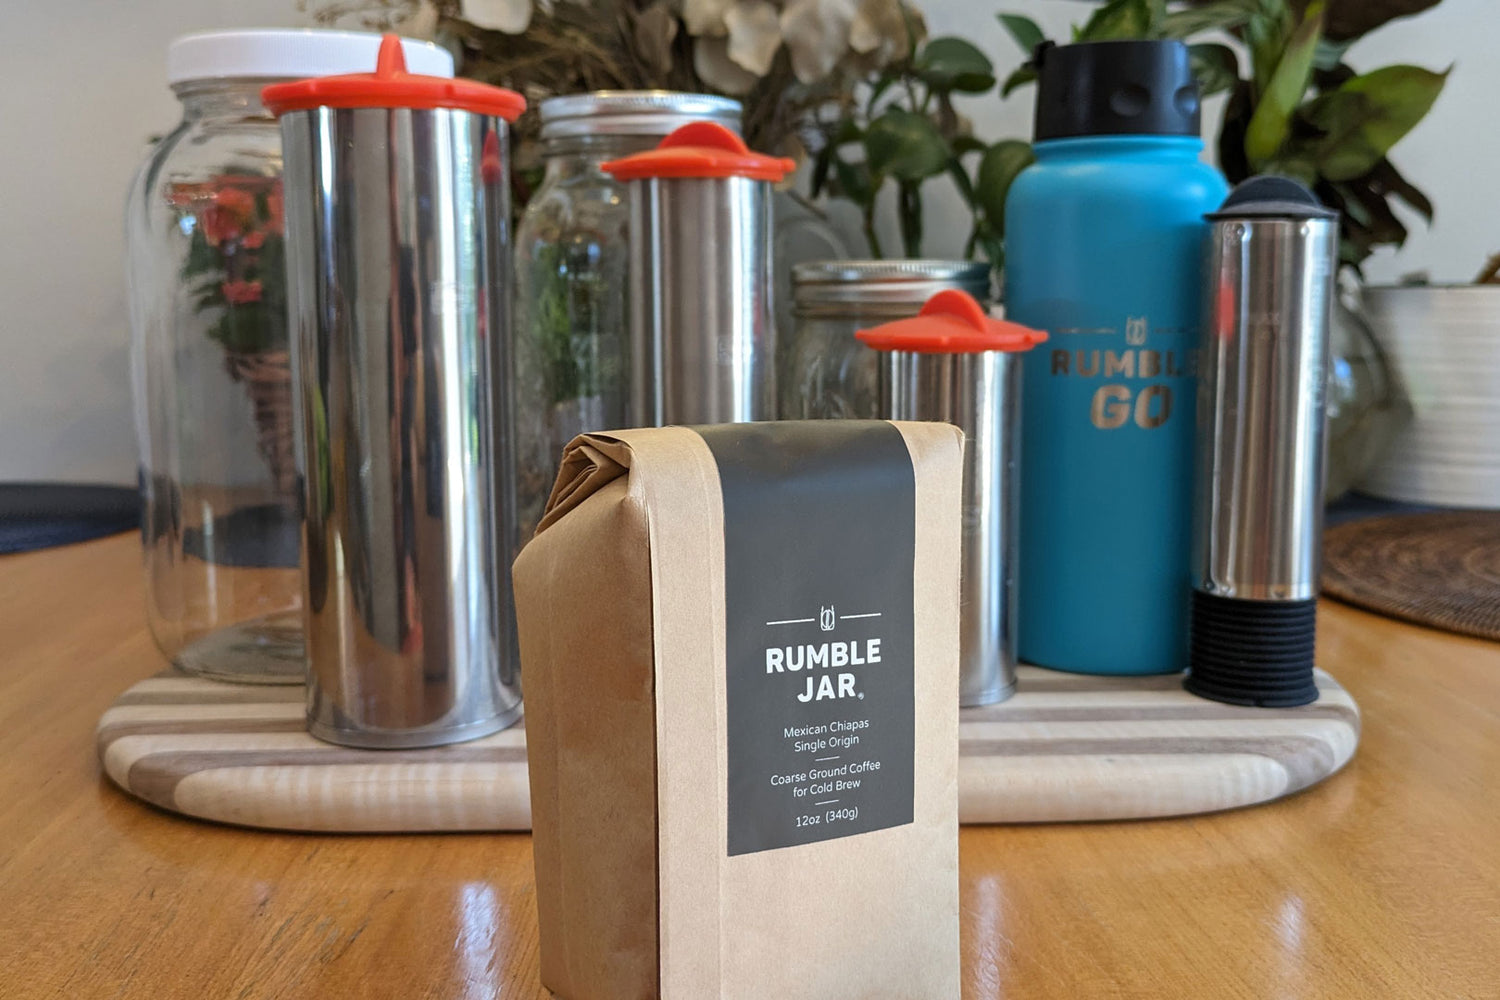 Rumble Jar coarse ground coffee with Rumble Jar filter family